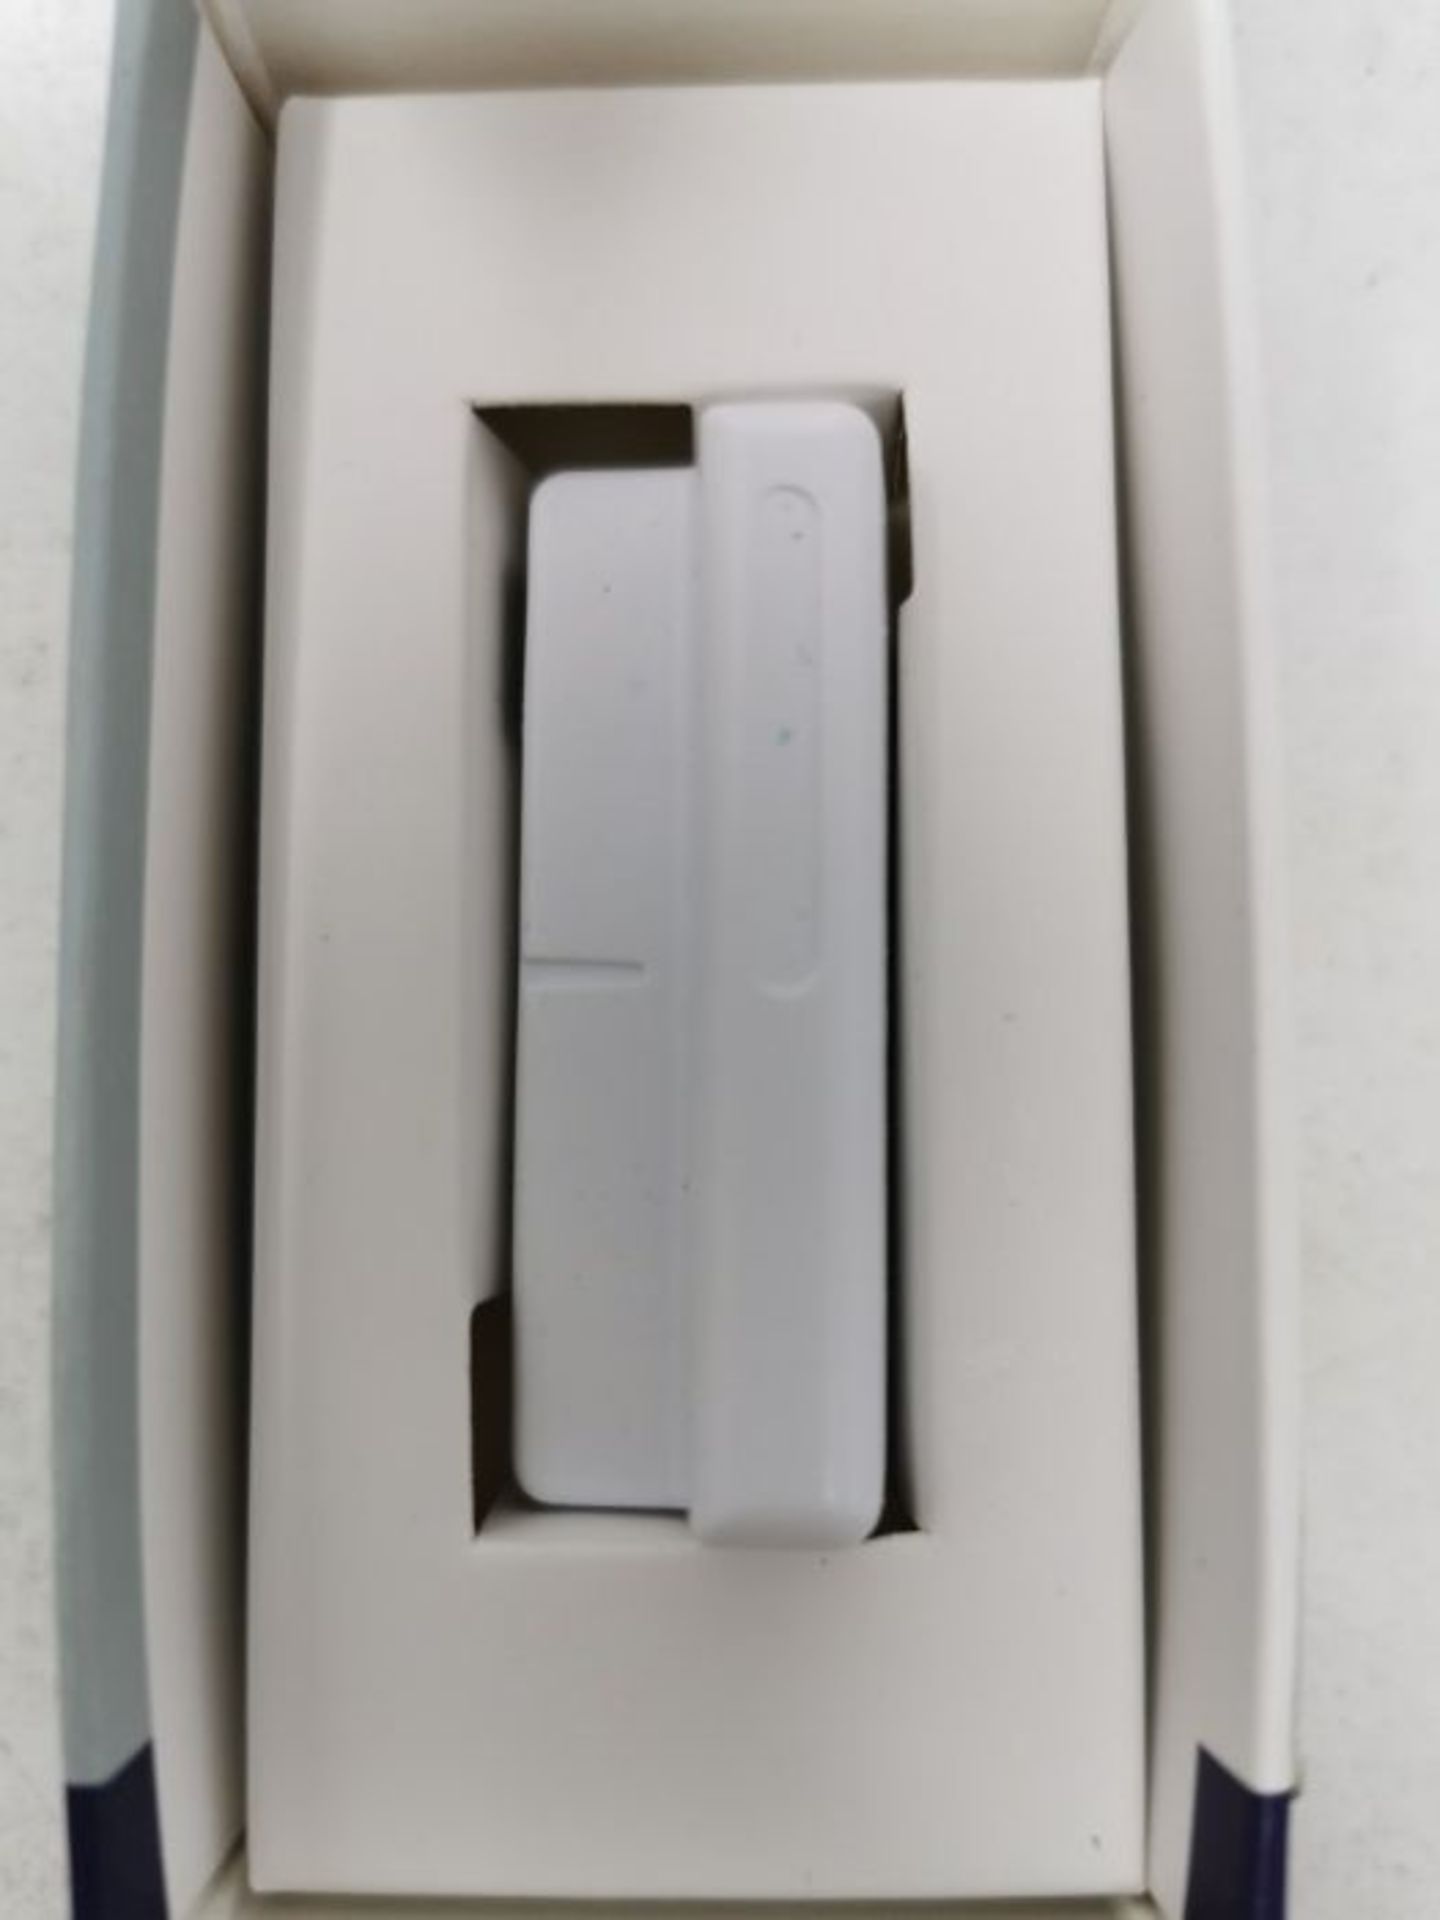 Yale AC-LM Sync Smart Home Alarm Accessory Lock Module, White, works with IA Alarms, f - Image 3 of 3